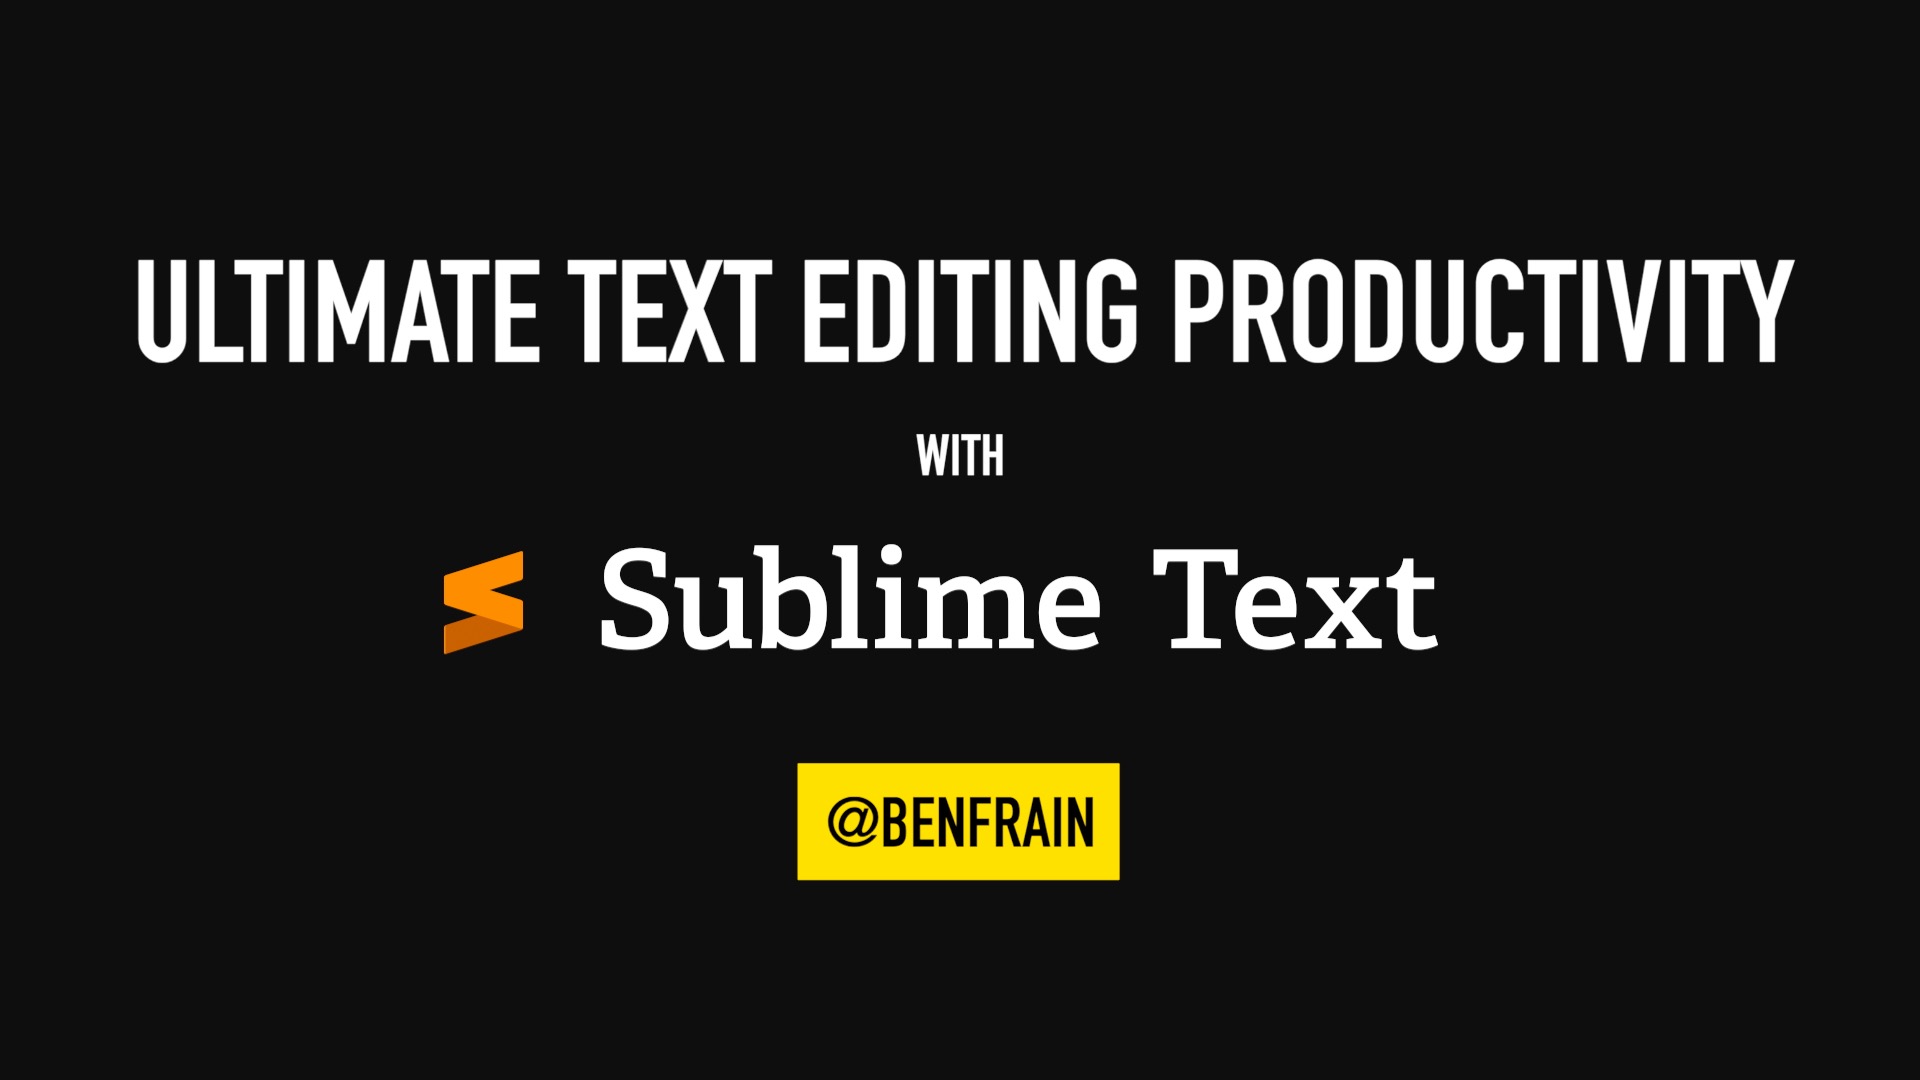 Poster for Ultimate Text Editing productivity with Sublime Text